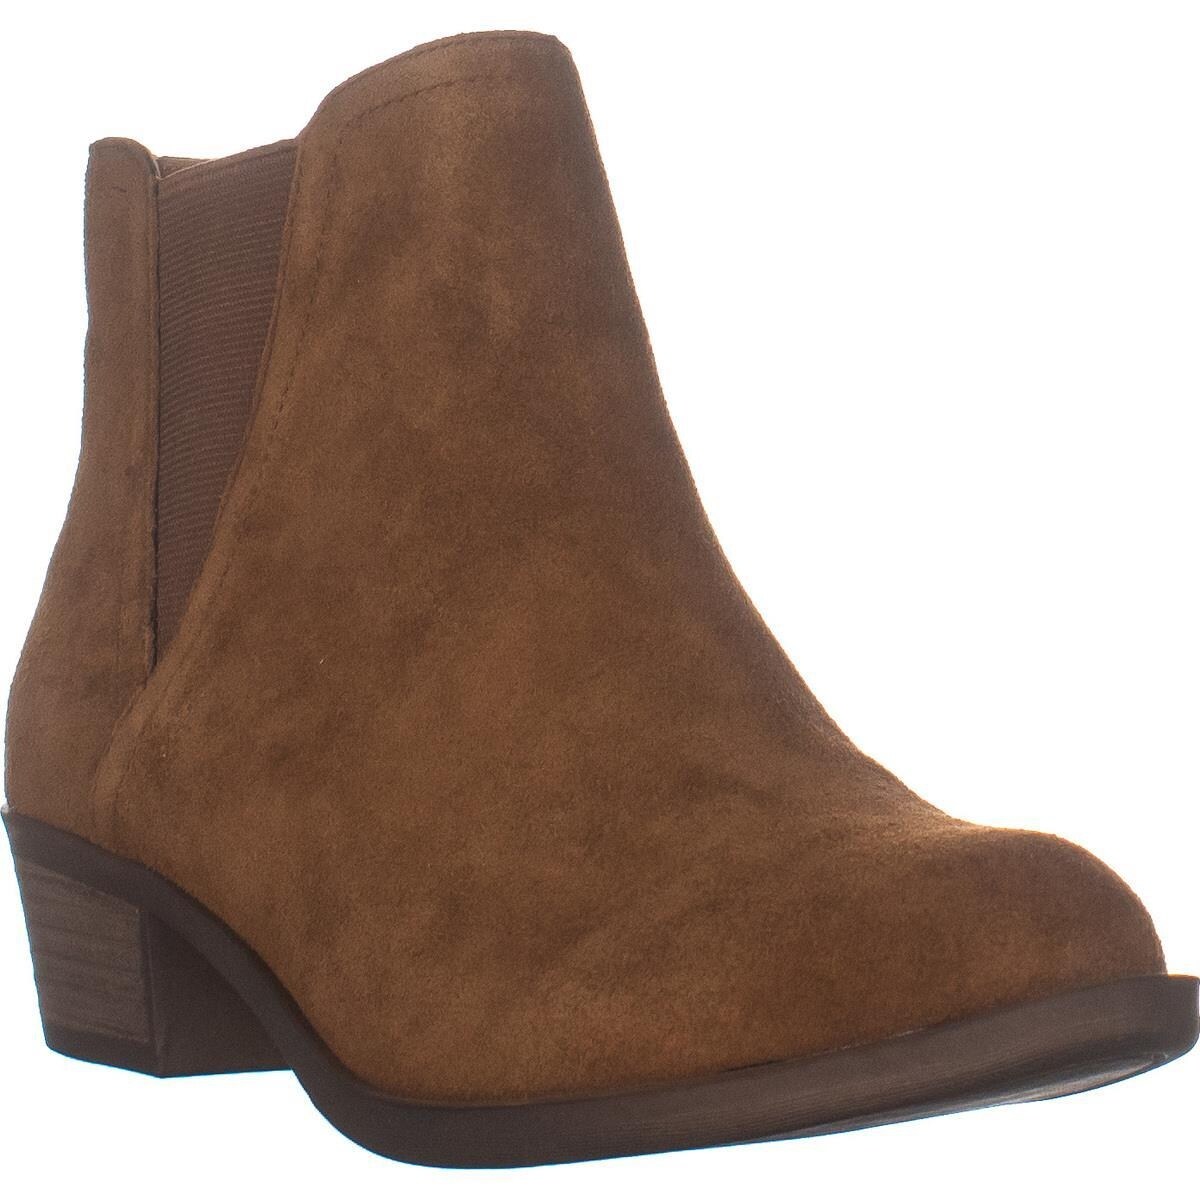 Shop Kensie Garry Round Toe Ankle Boots 